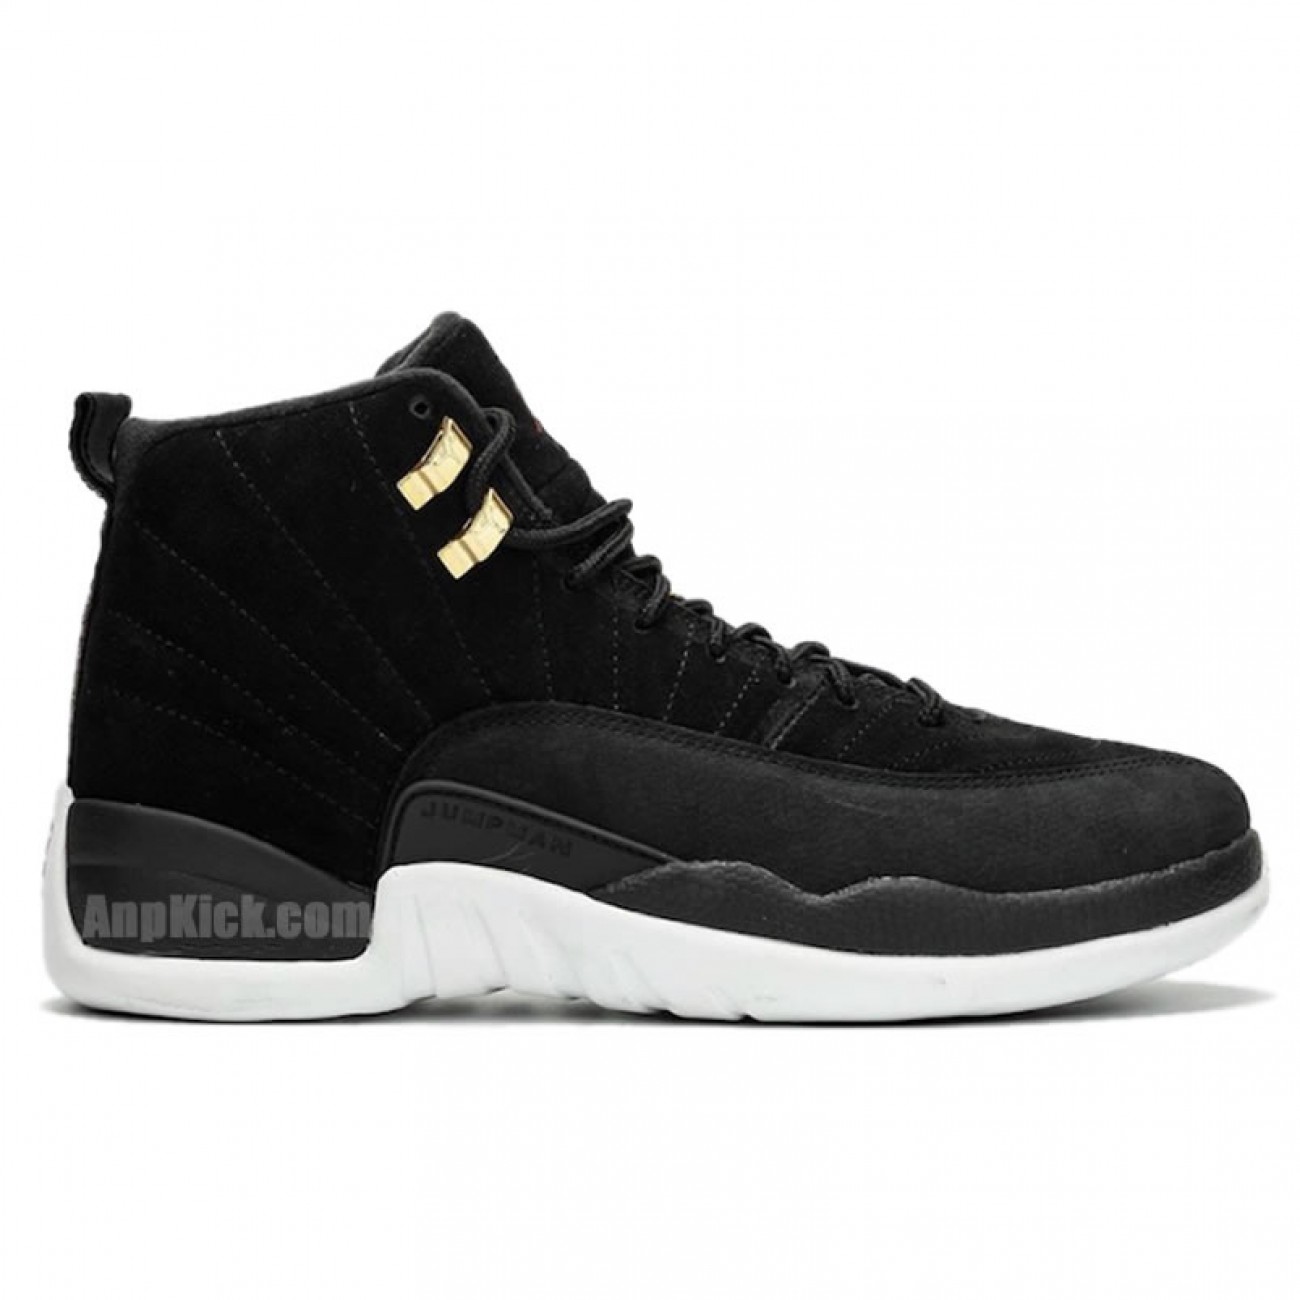 Air Jordan 12 "Reverse Taxi" 2019 Outfit For Sale 130690-017